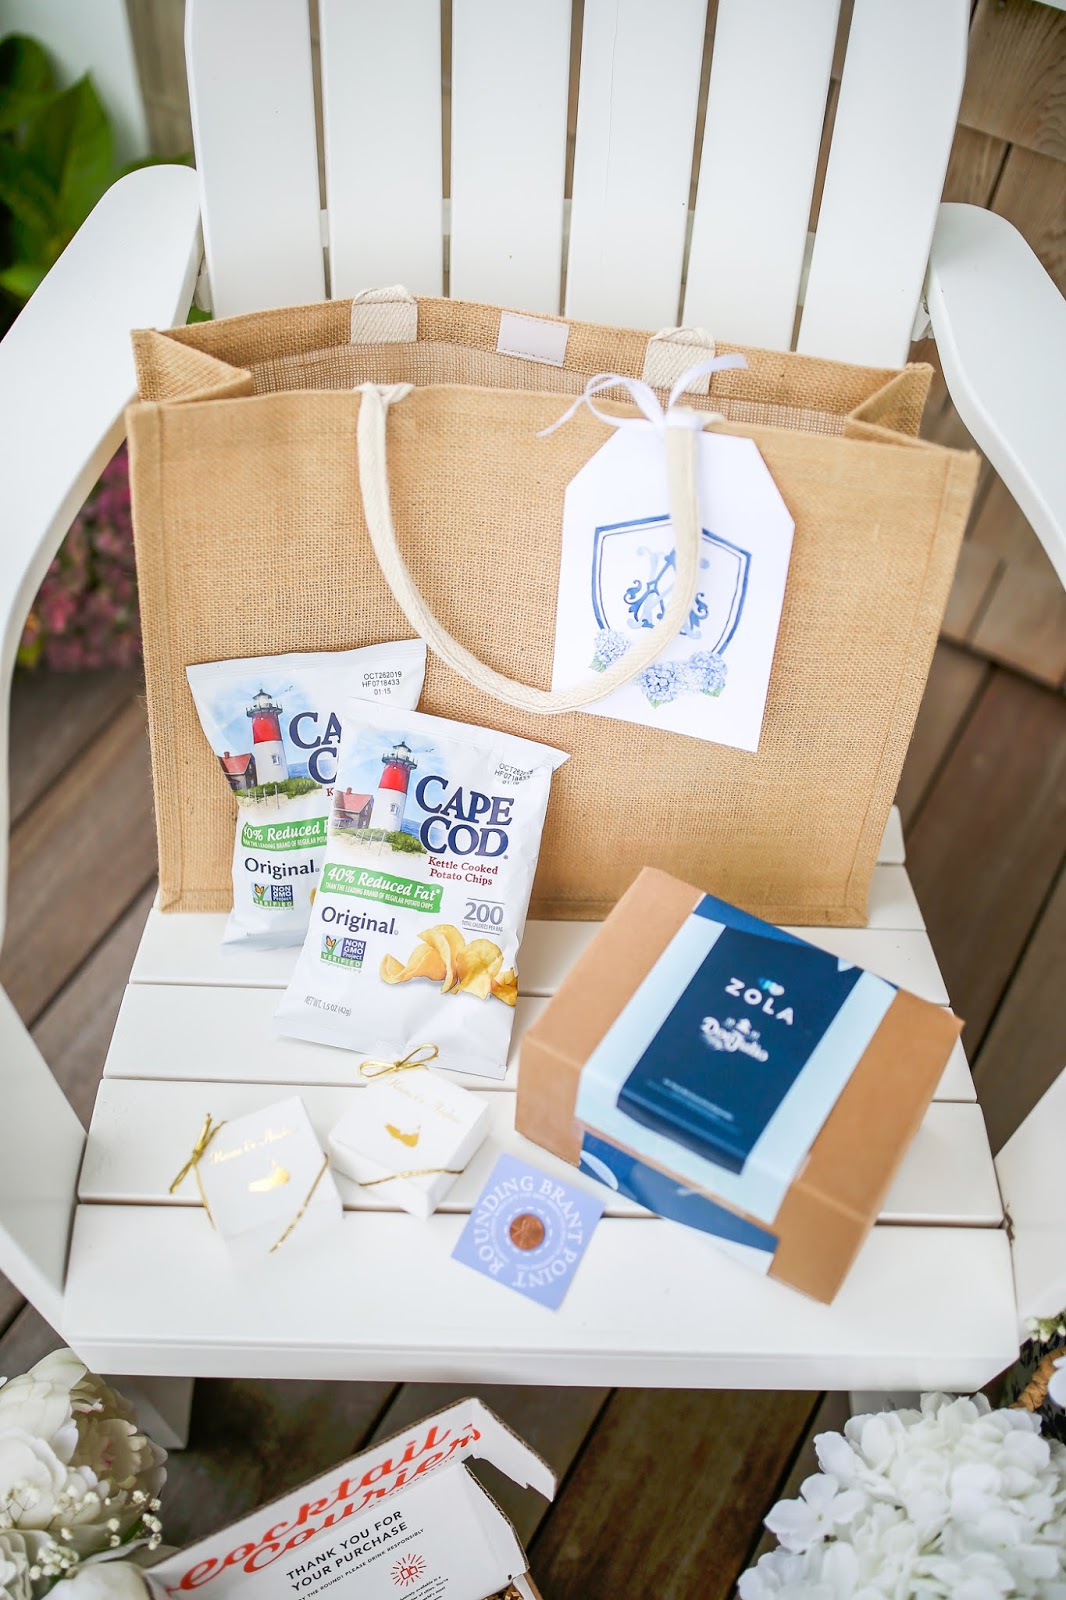 Our Welcome Bags, Connecticut Fashion and Lifestyle Blog